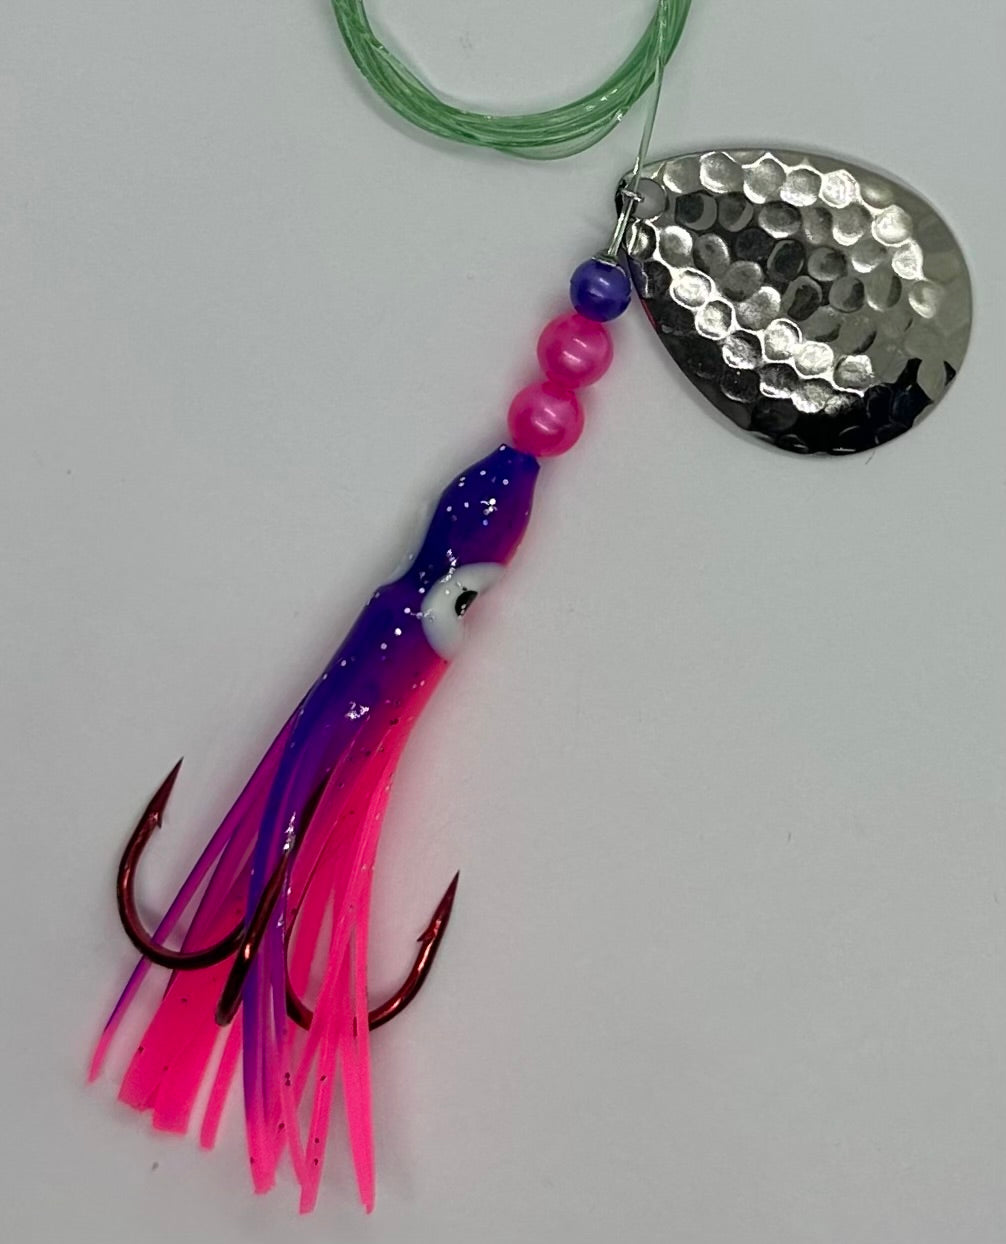 Salmon Tackle - Purple and Pink #6- Luminous Salmon Hoochie-6cm - Hammered Nickel Spinner Blade- All time favorite color for Salmon